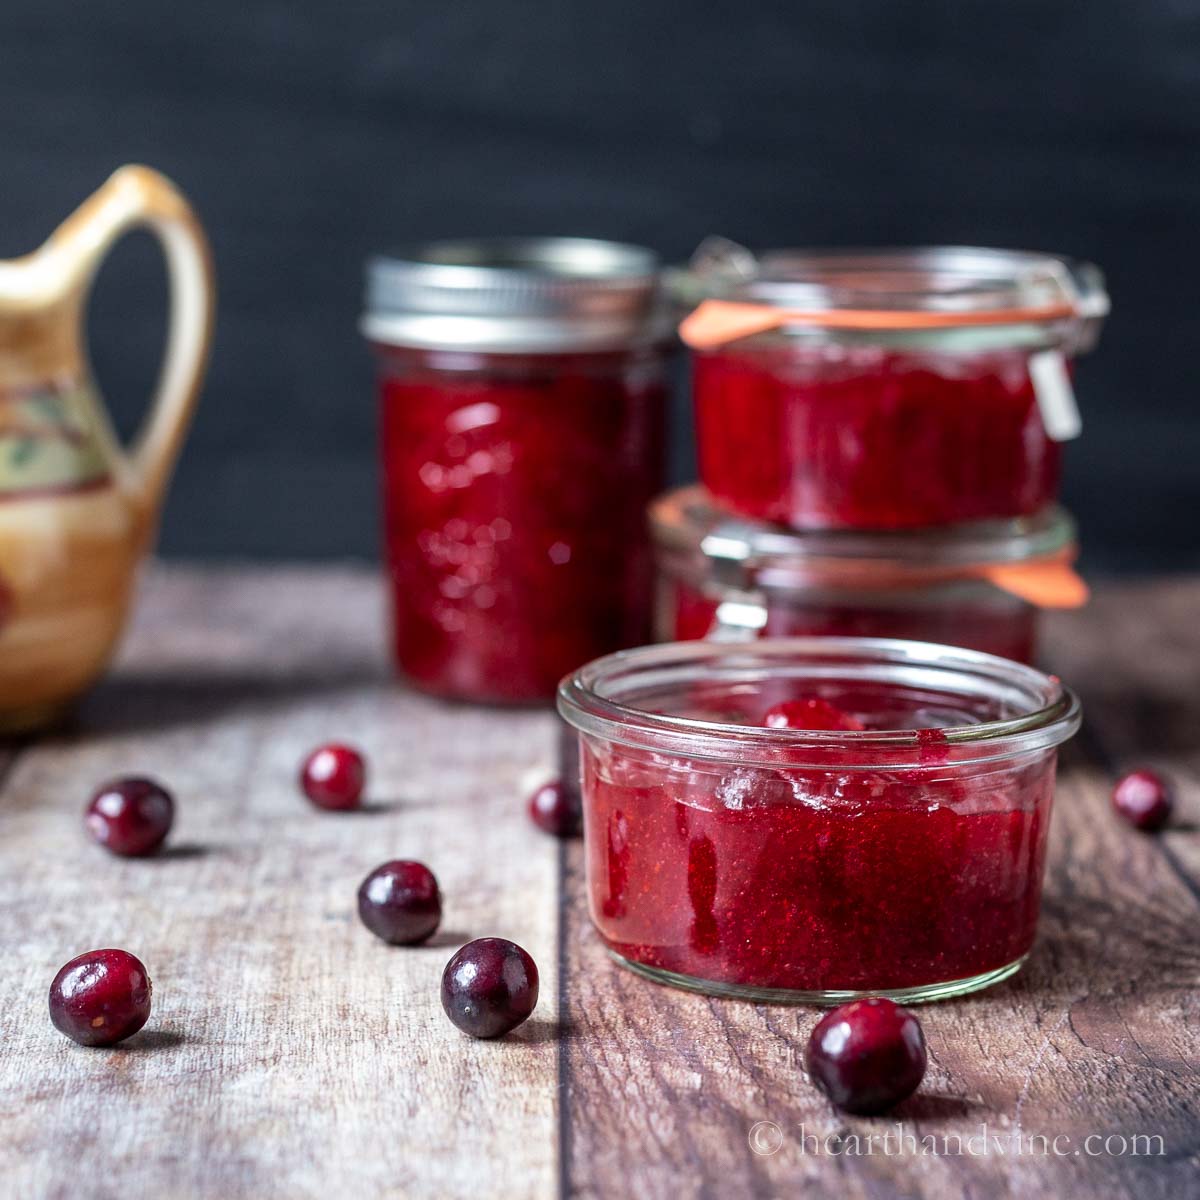 Jars of cranberry jam and fresh cranberries scattered on the table.